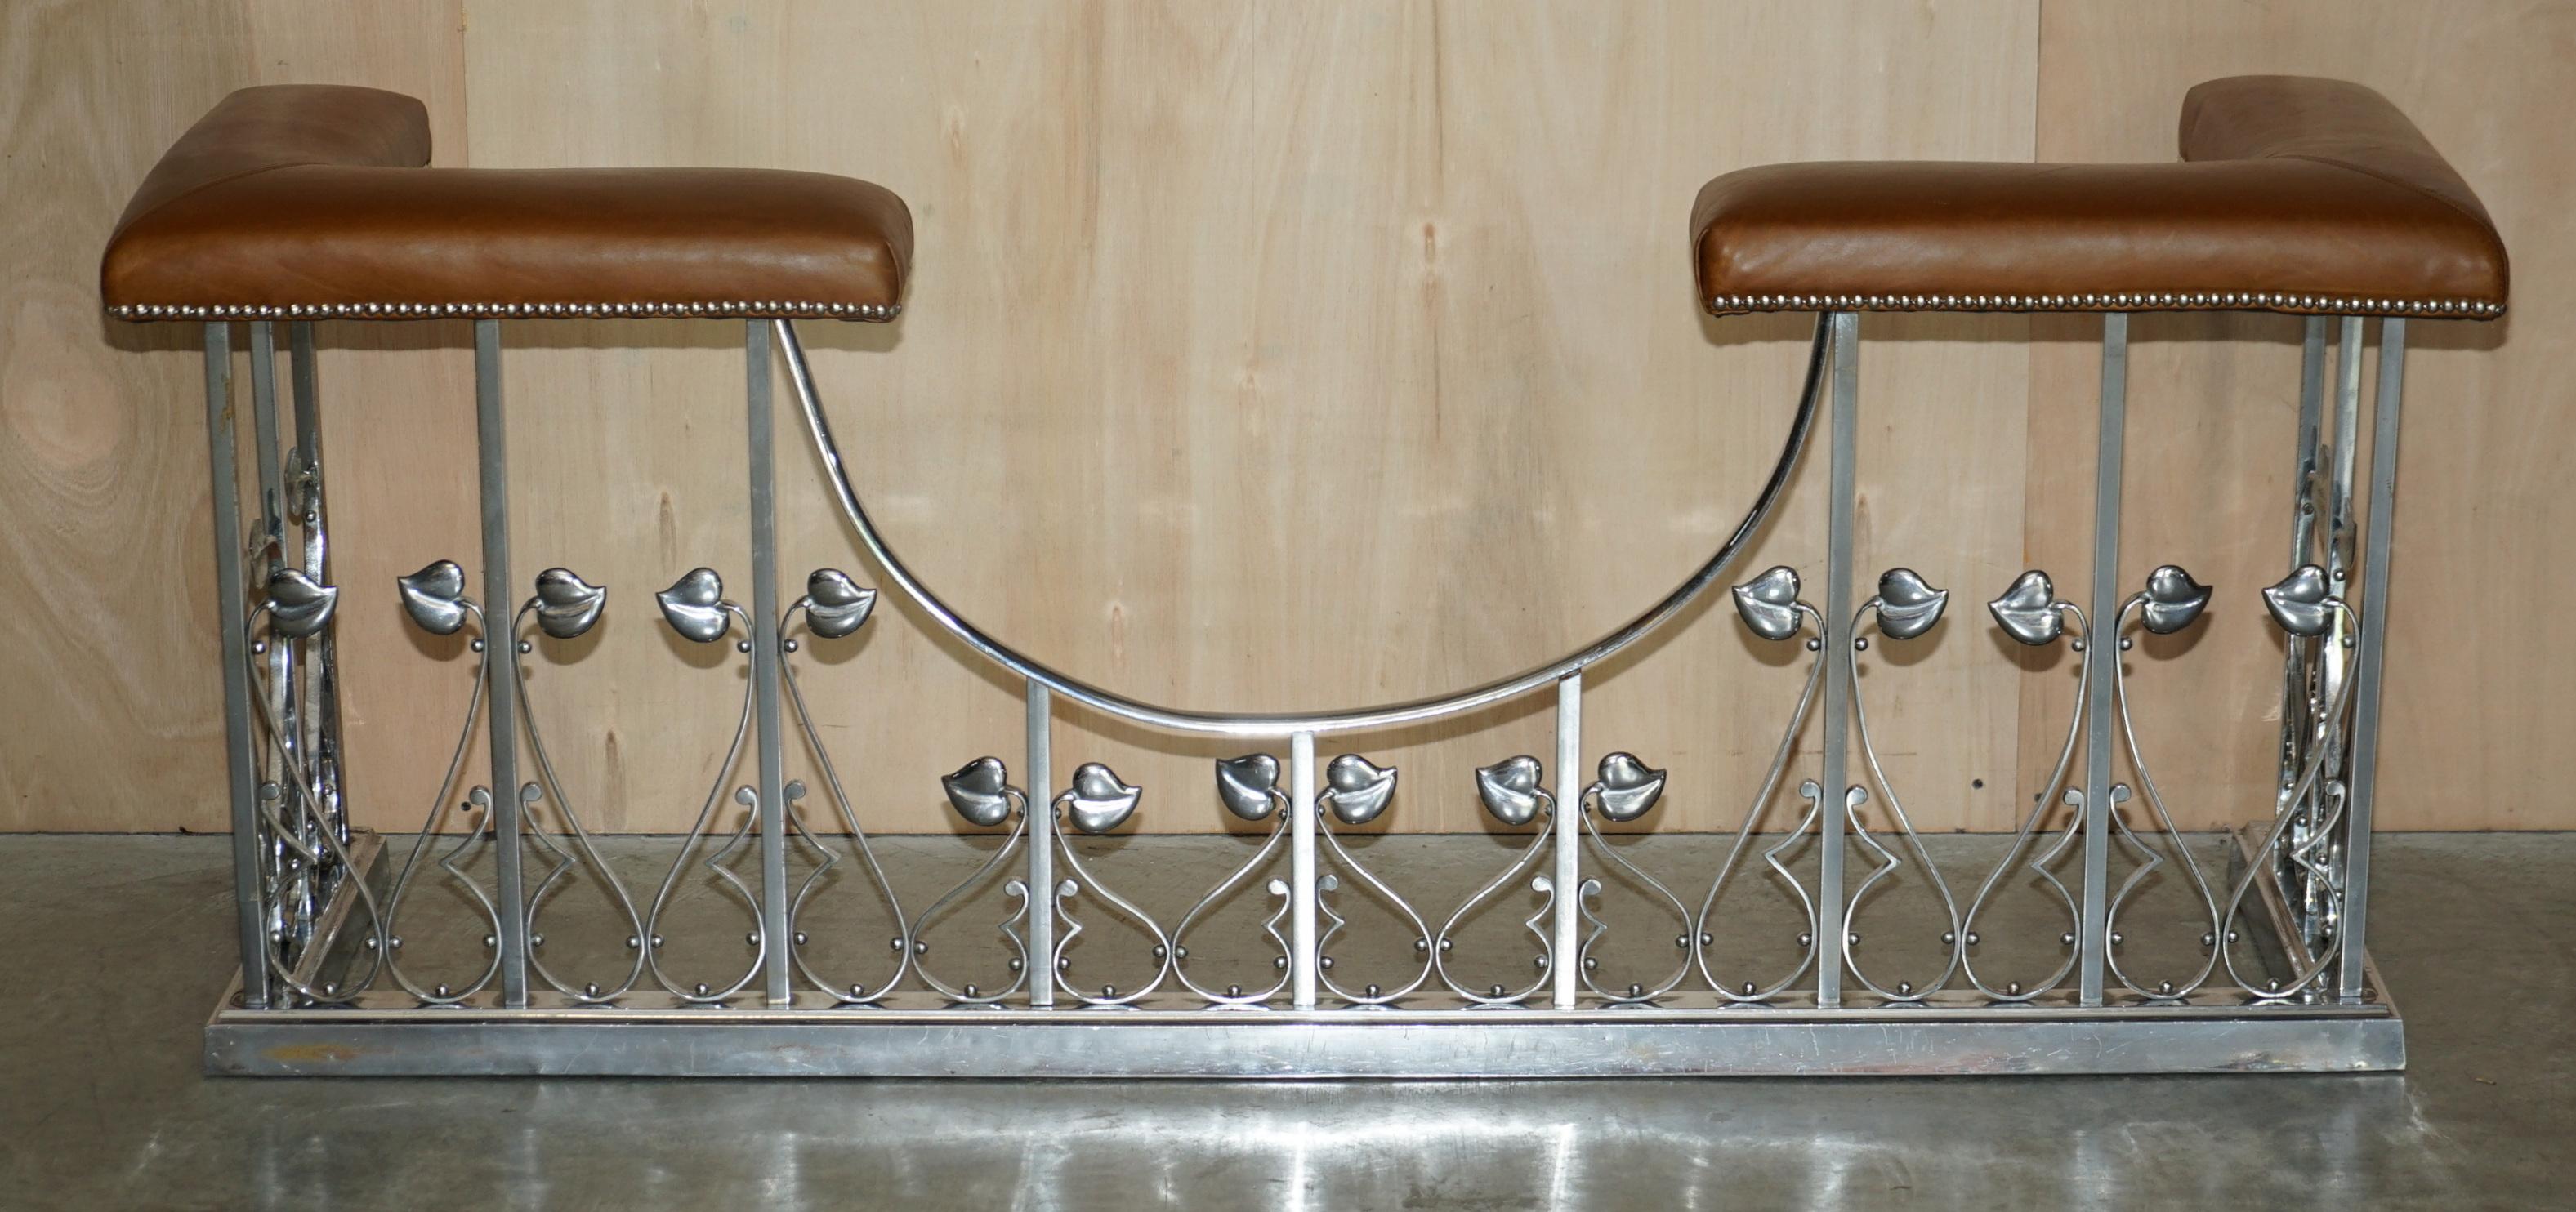 We are delighted to offer for sale this very important, Museum quality, Victorian circa 1870 club fender with brown leather seat pads and Chrome plated, Art Nouveau flowers

What a thing! This is one of, if not the finest example I have come